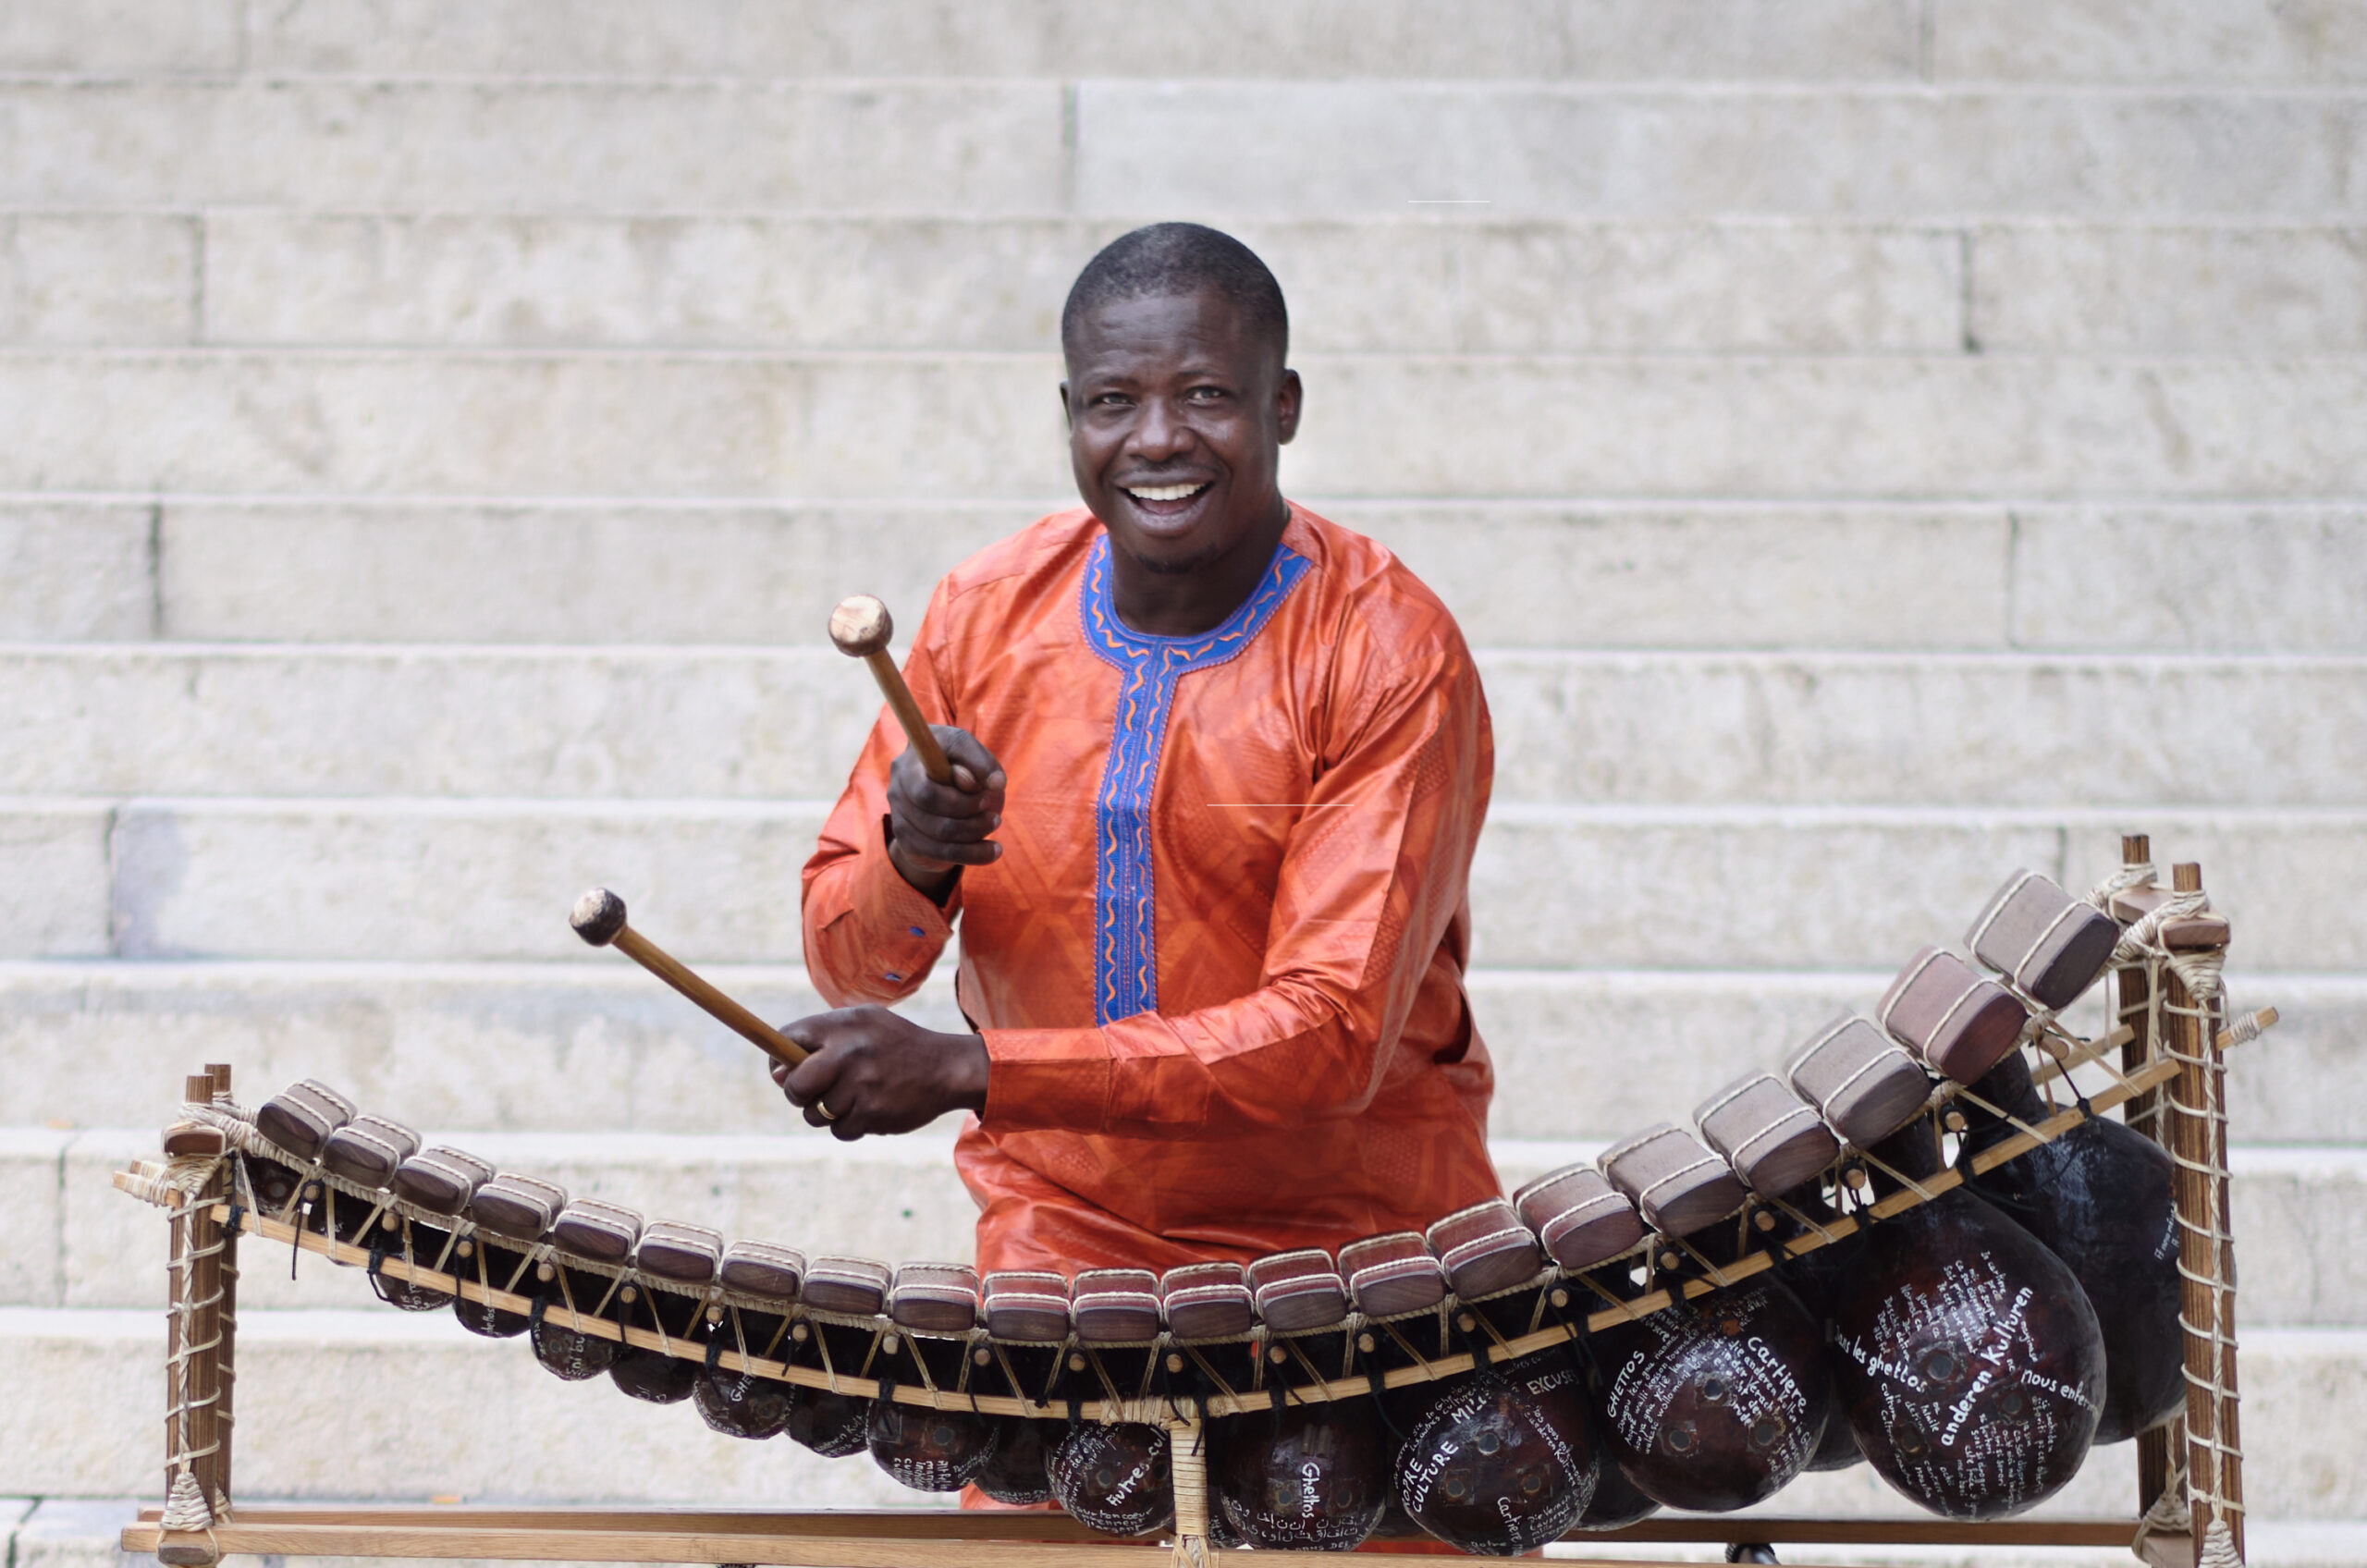 Mamadou Diabate smiling and playing an instrument